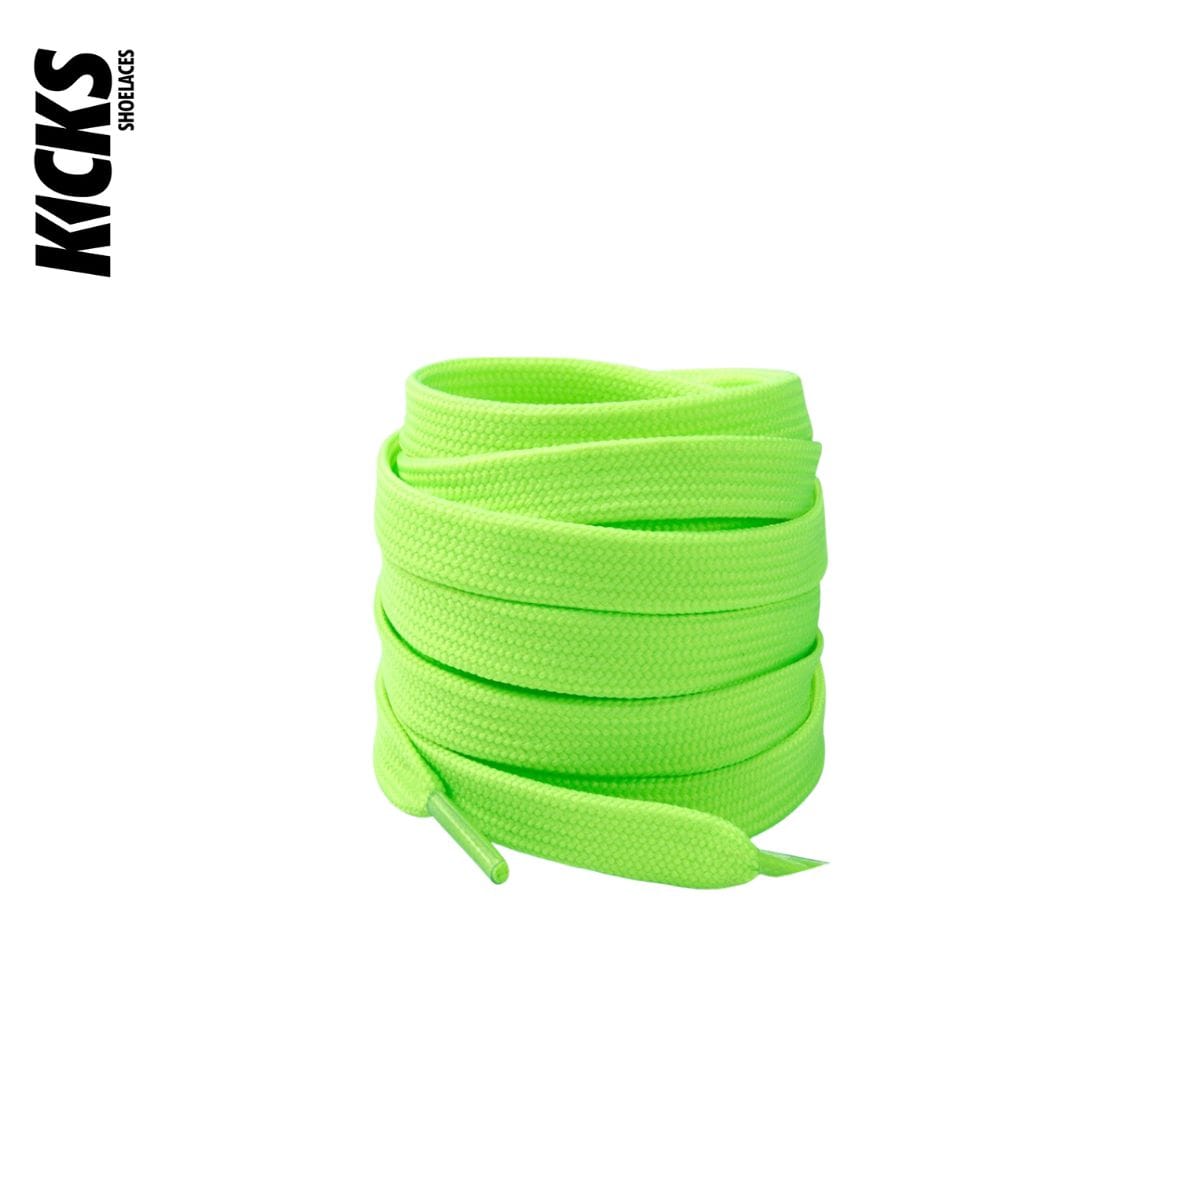 Bright Green Nike Dunks Shoelace Replacements - Kicks Shoelaces